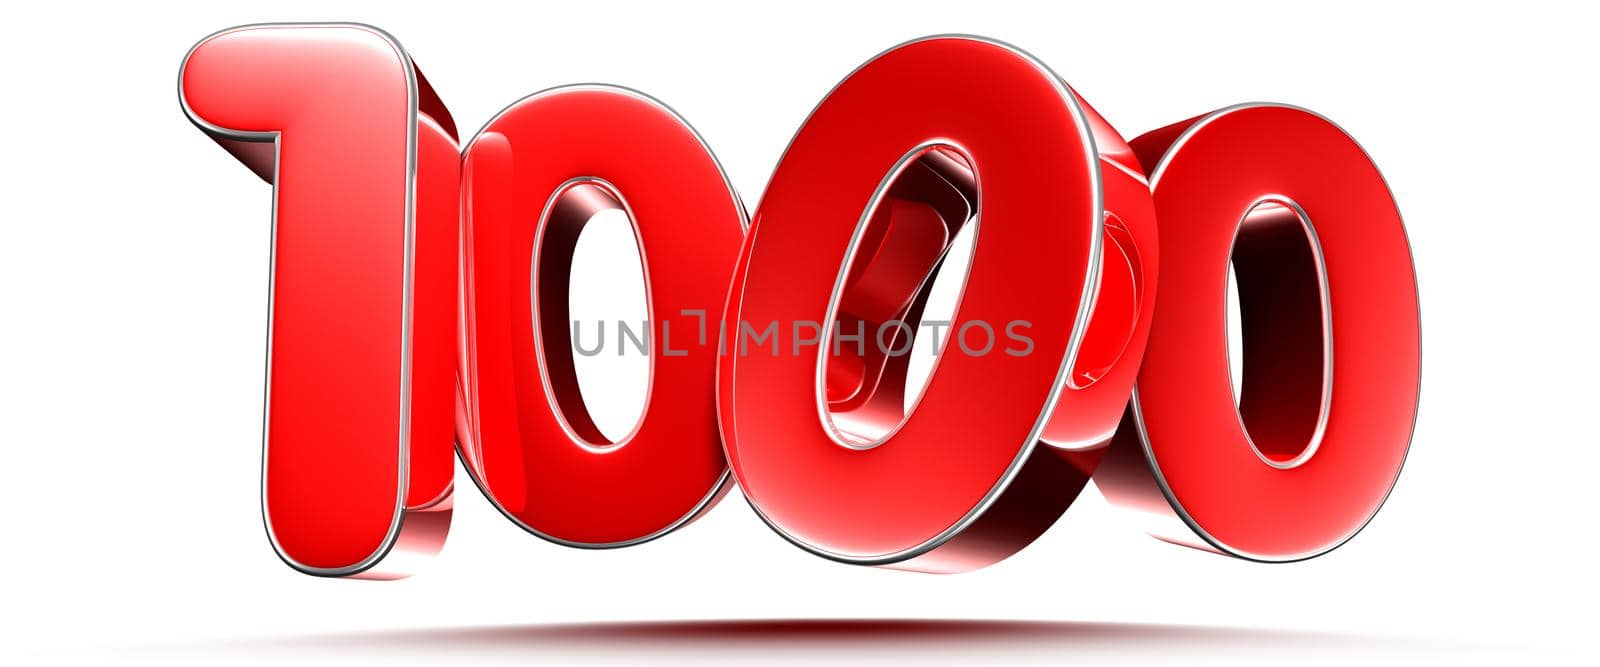 Rounded red numbers 1000 on white background 3D illustration with clipping path by thitimontoyai